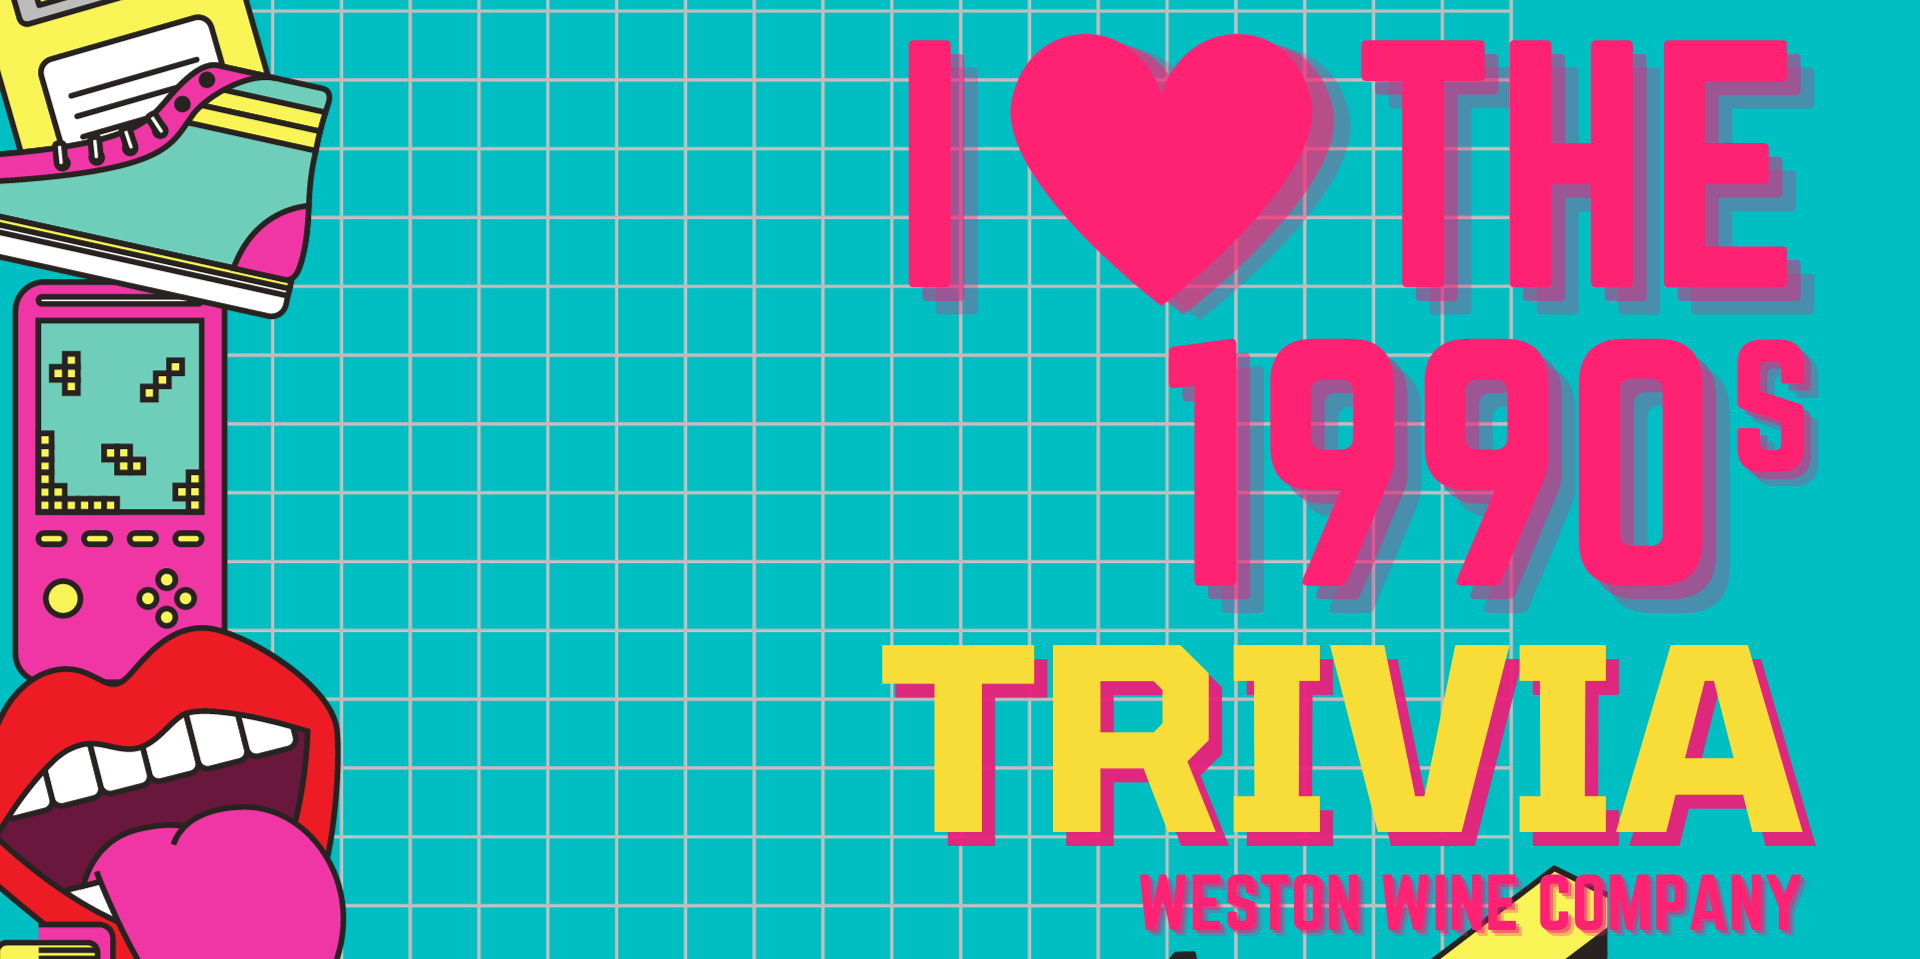 90s Trivia promotional image